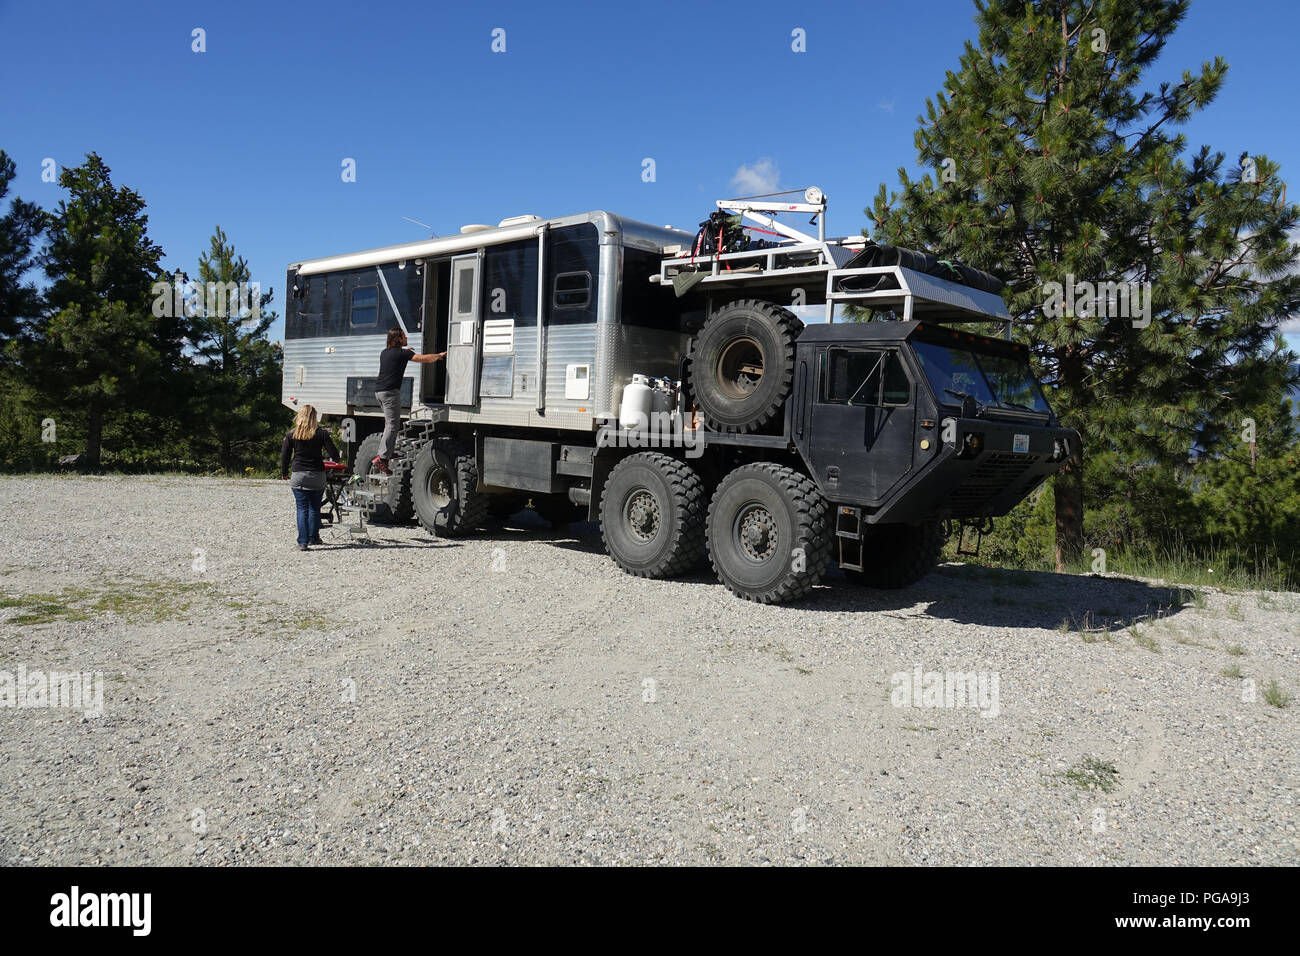 This military HEMTT (Heavy Expanded Mobility Tactical Truck) built by ...